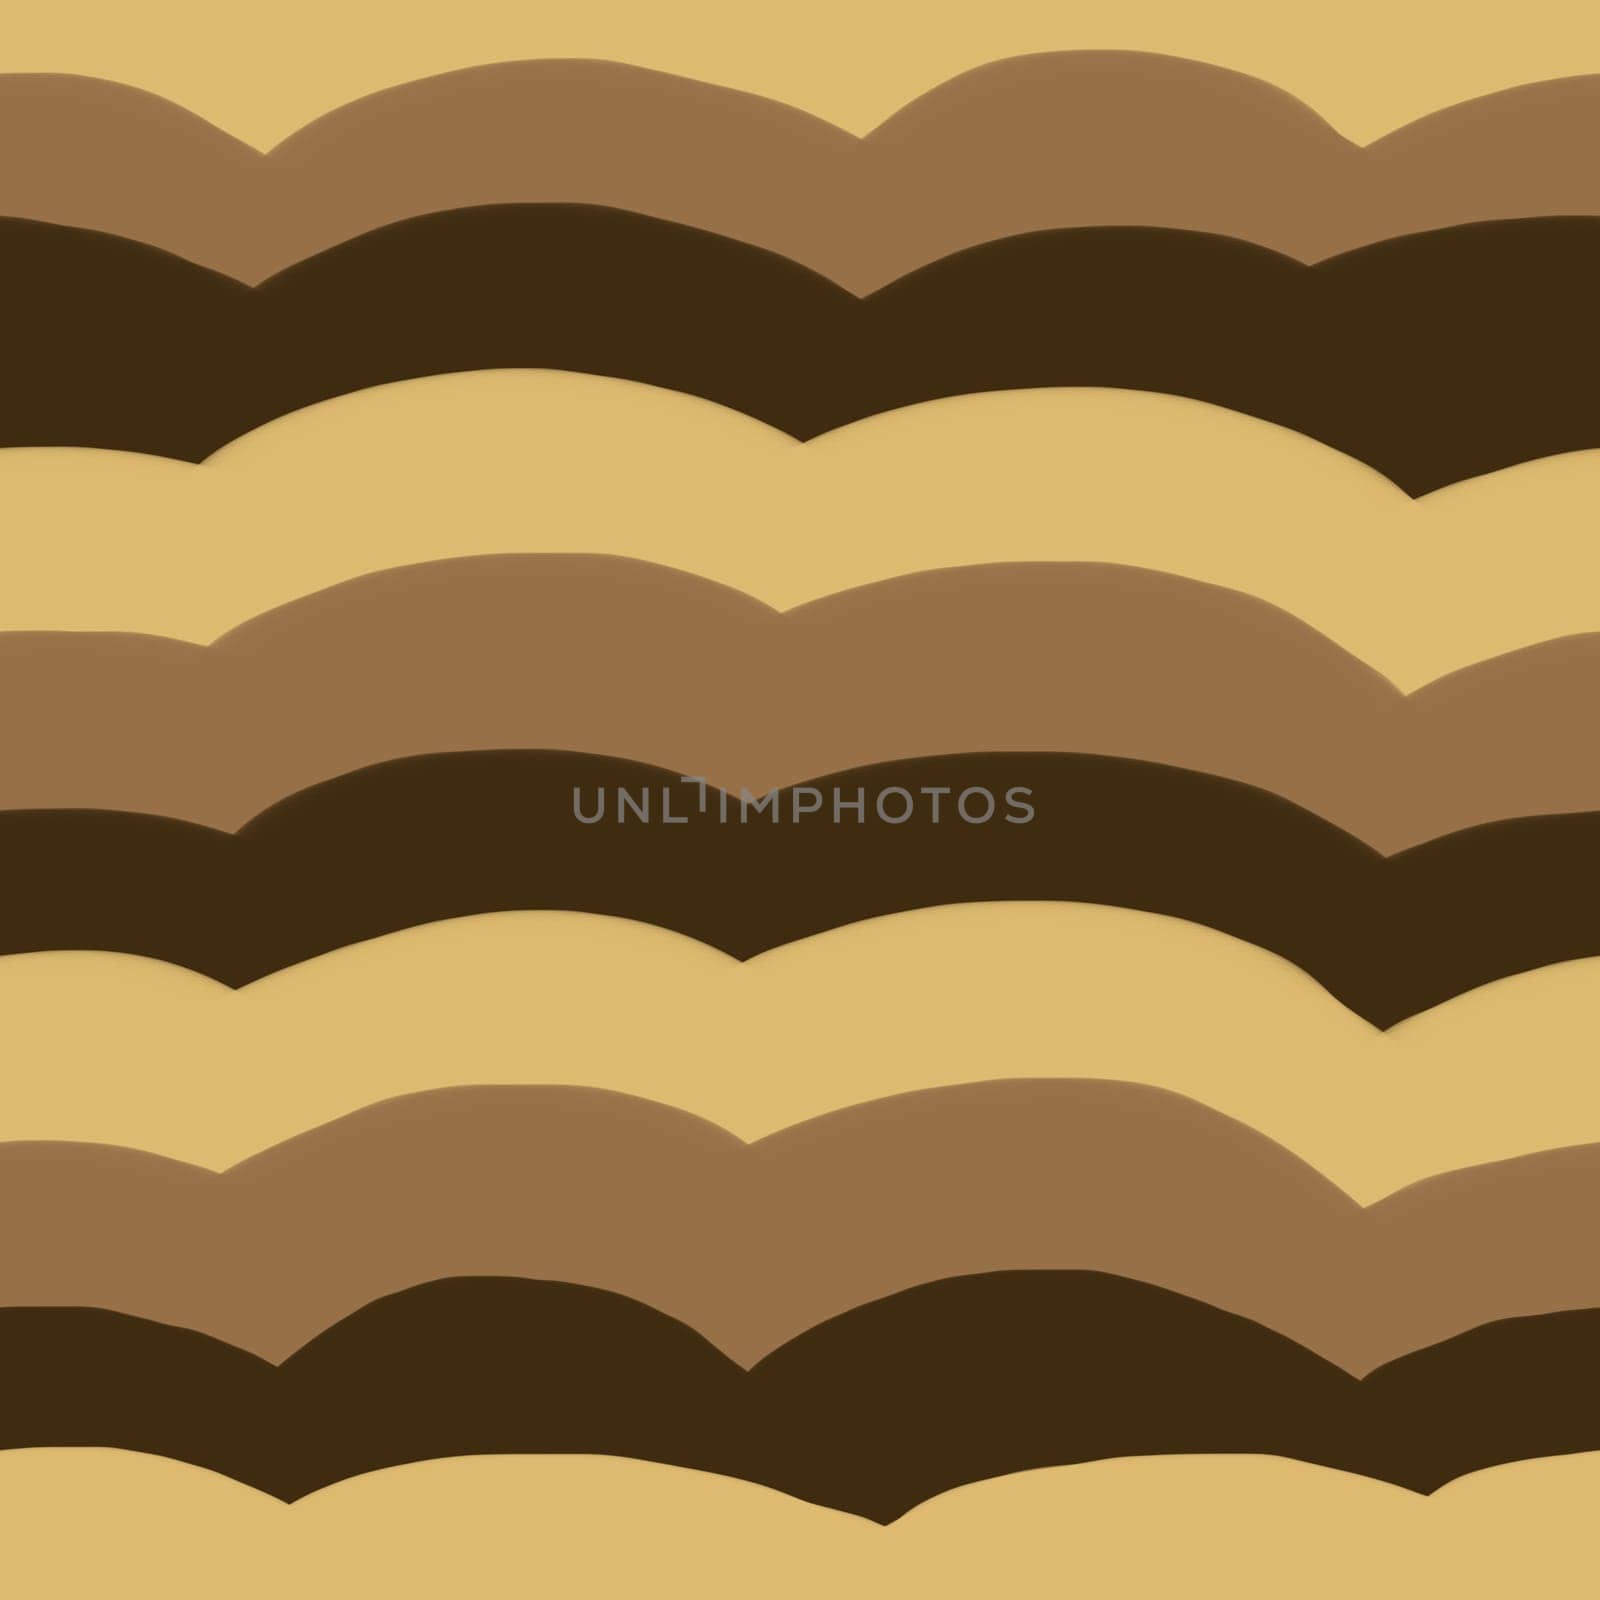 Seamless Repeatable Pattern with Sea Waves in Brown Color. Handdrawn Sketchy Drawing Digital Paper. Creative Background for Children Room Poster, Scrapbooking.